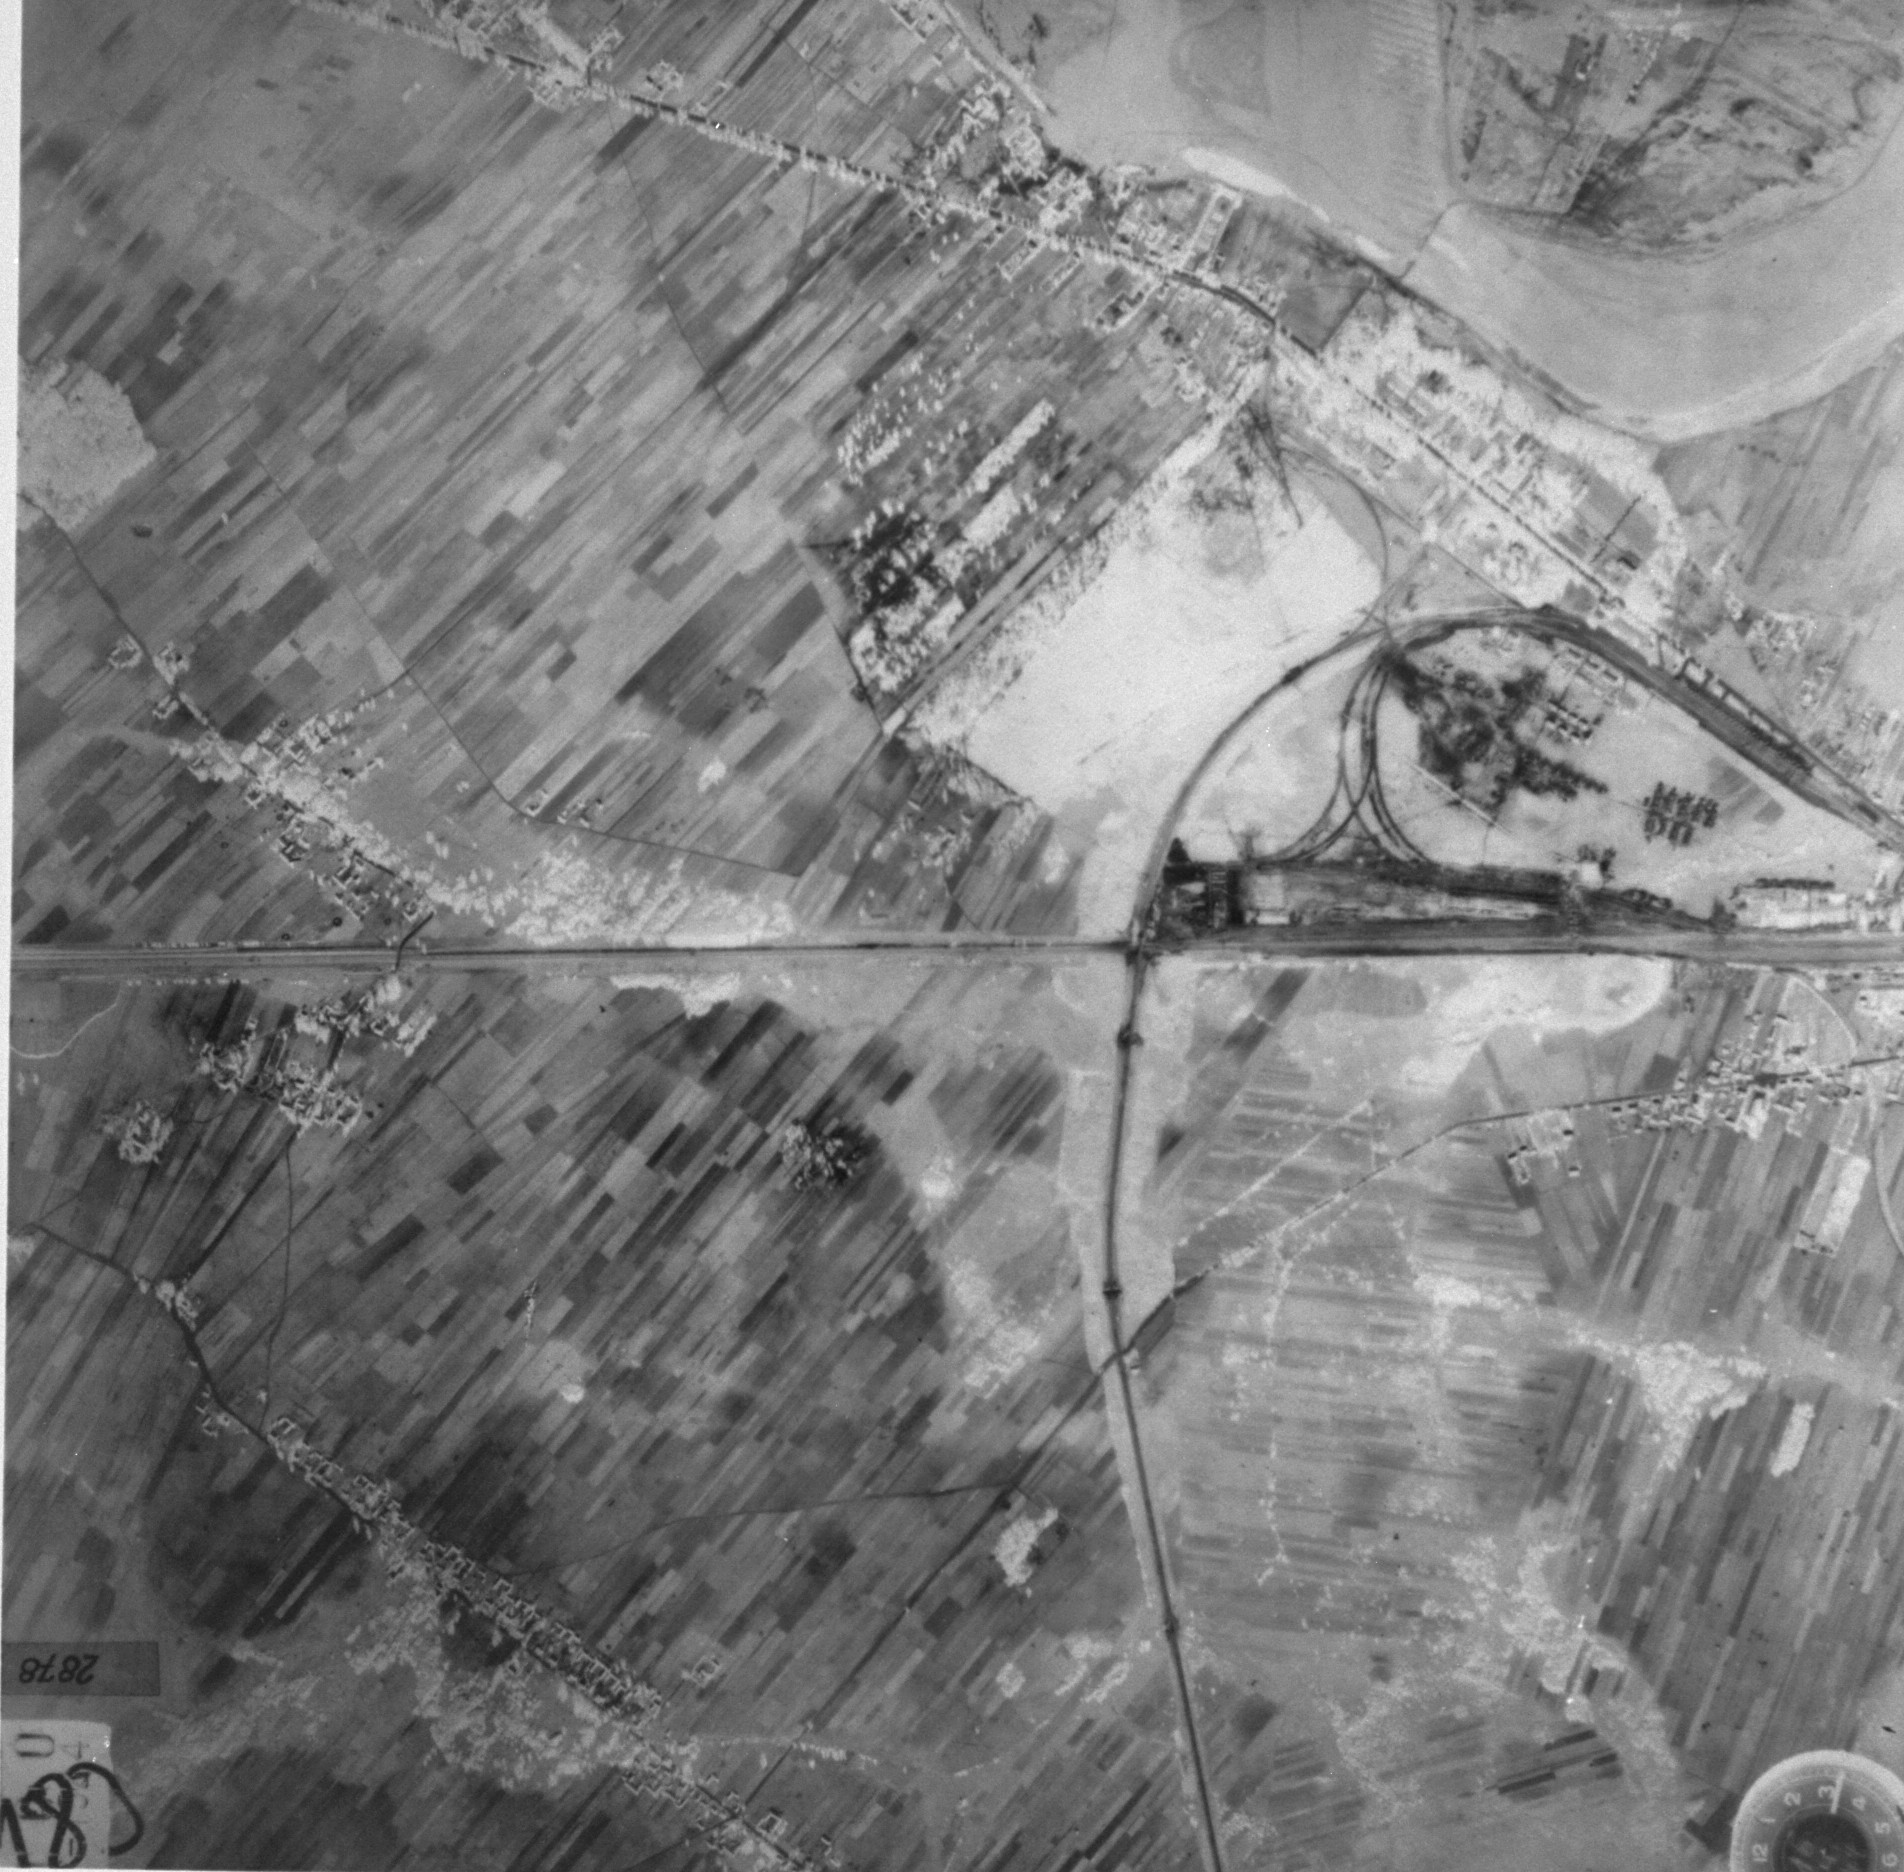 An aerial photograph taken by the German air force.

The photo appears to depict the rail line in Malkinia Gorna, and may indicate where the deportation train transports from Warsaw in 1942-43 turned south and crossed the Bug River toward Treblinka.